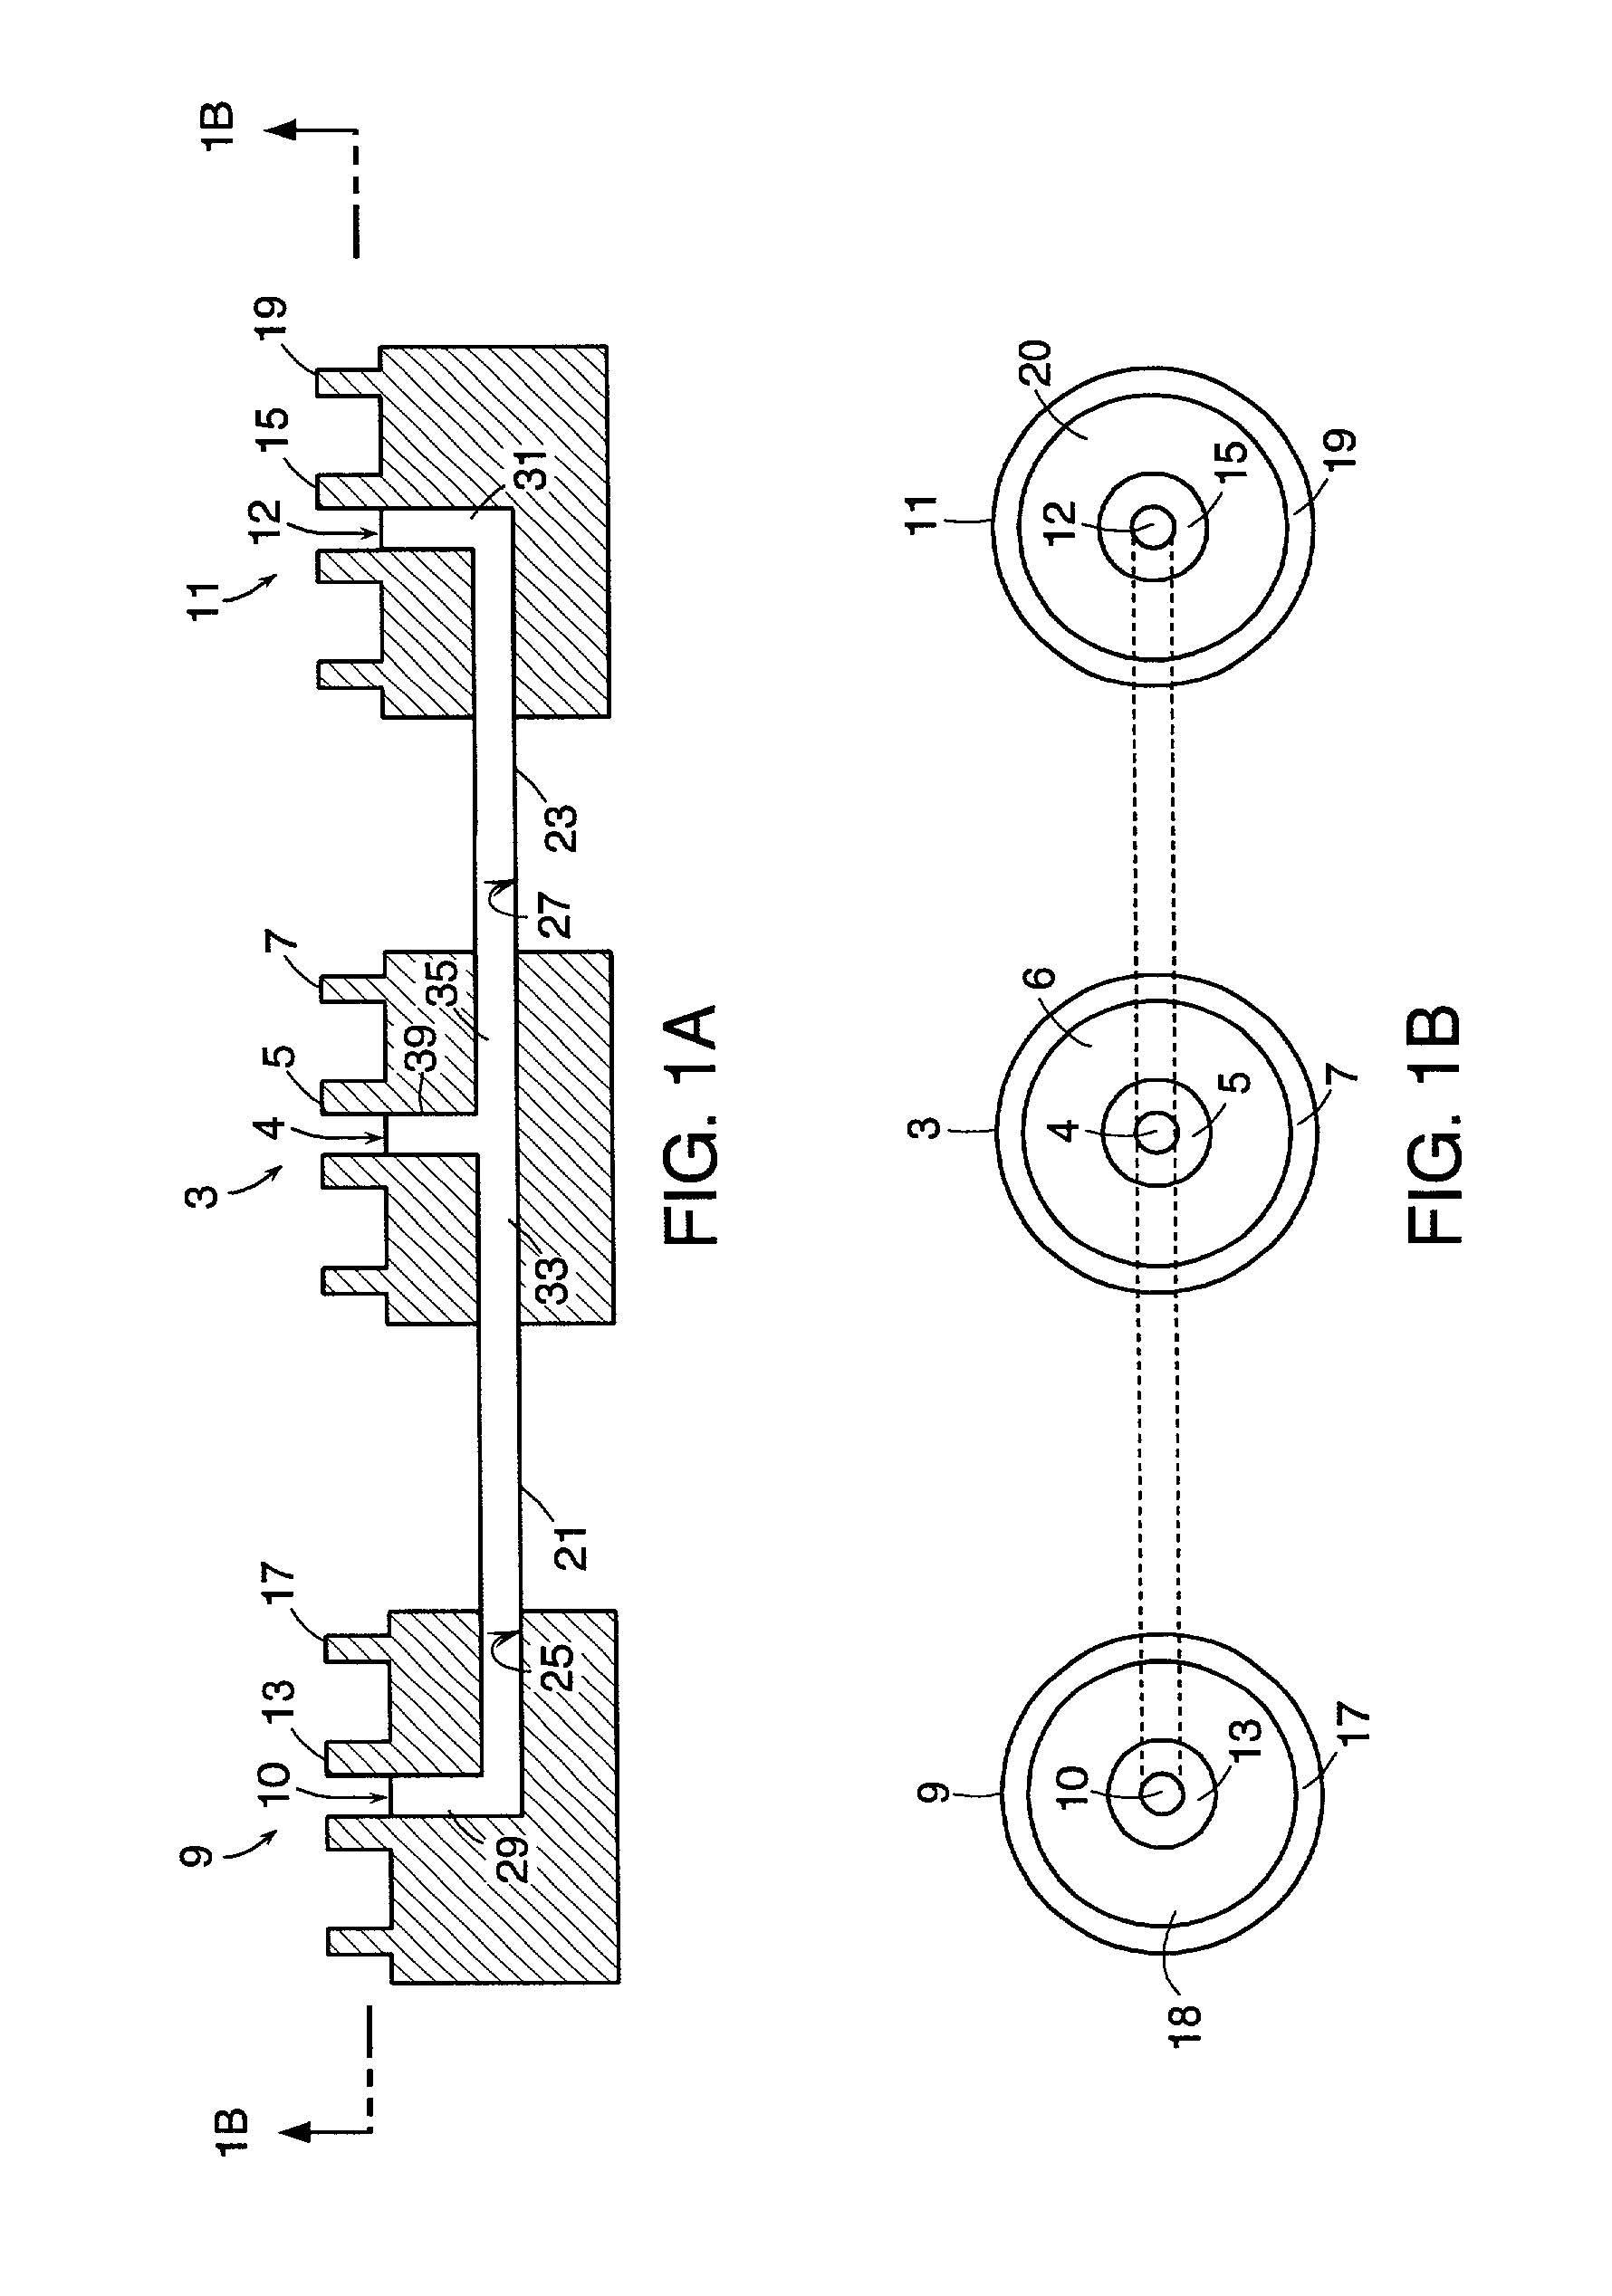 Graft delivery system